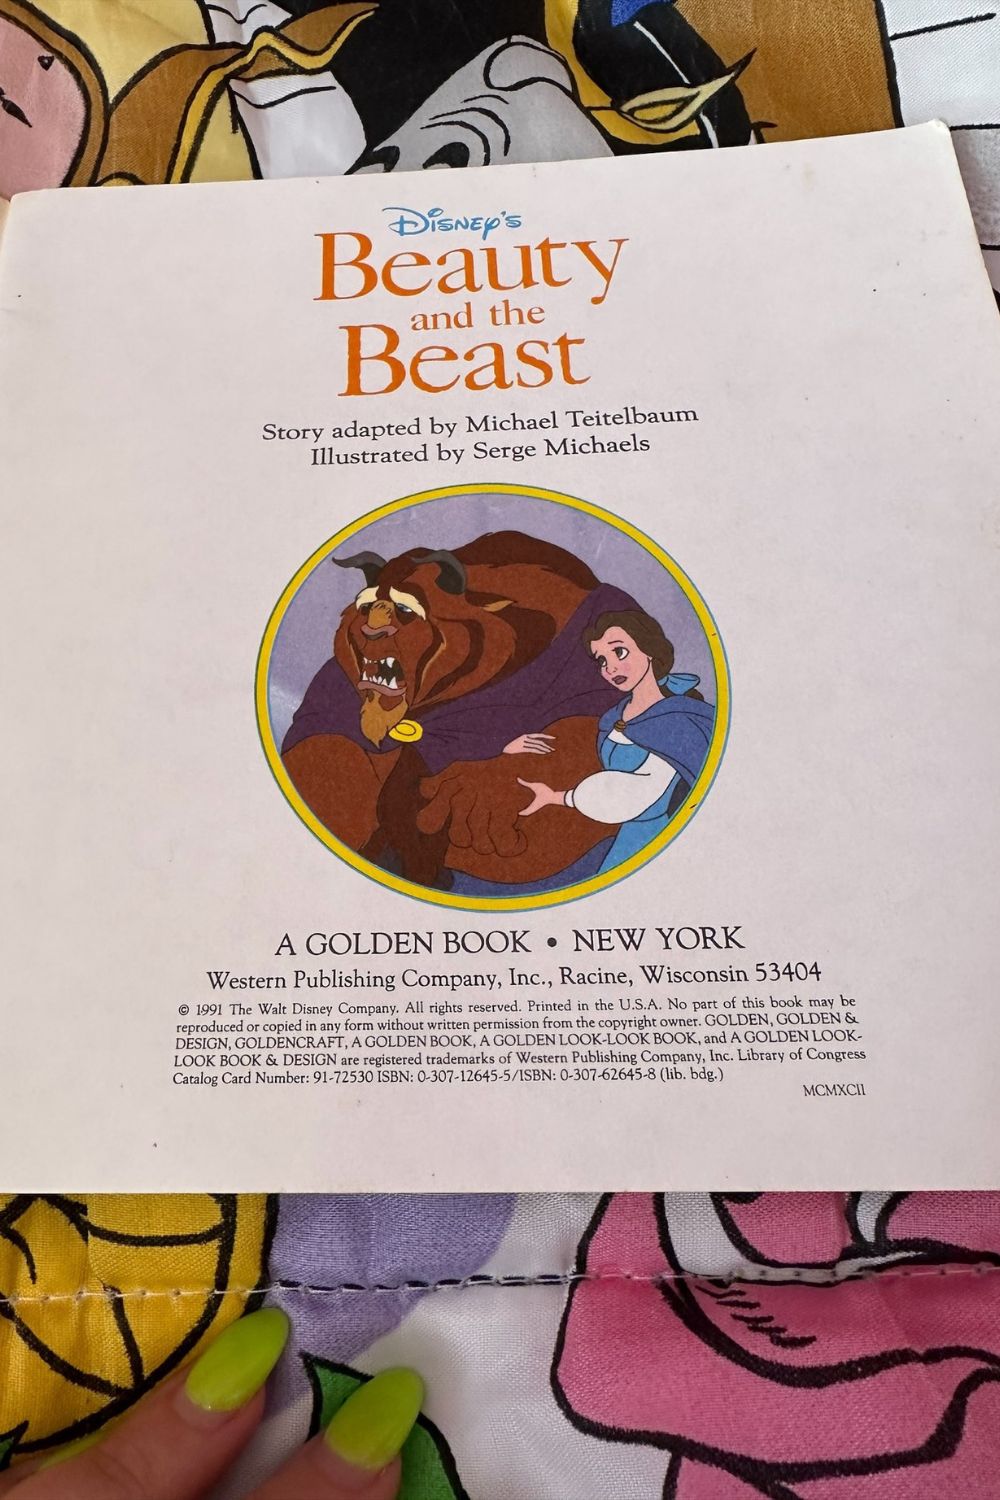 1991 DISNEY'S BEAUTY AND THE BEAST BOOK*